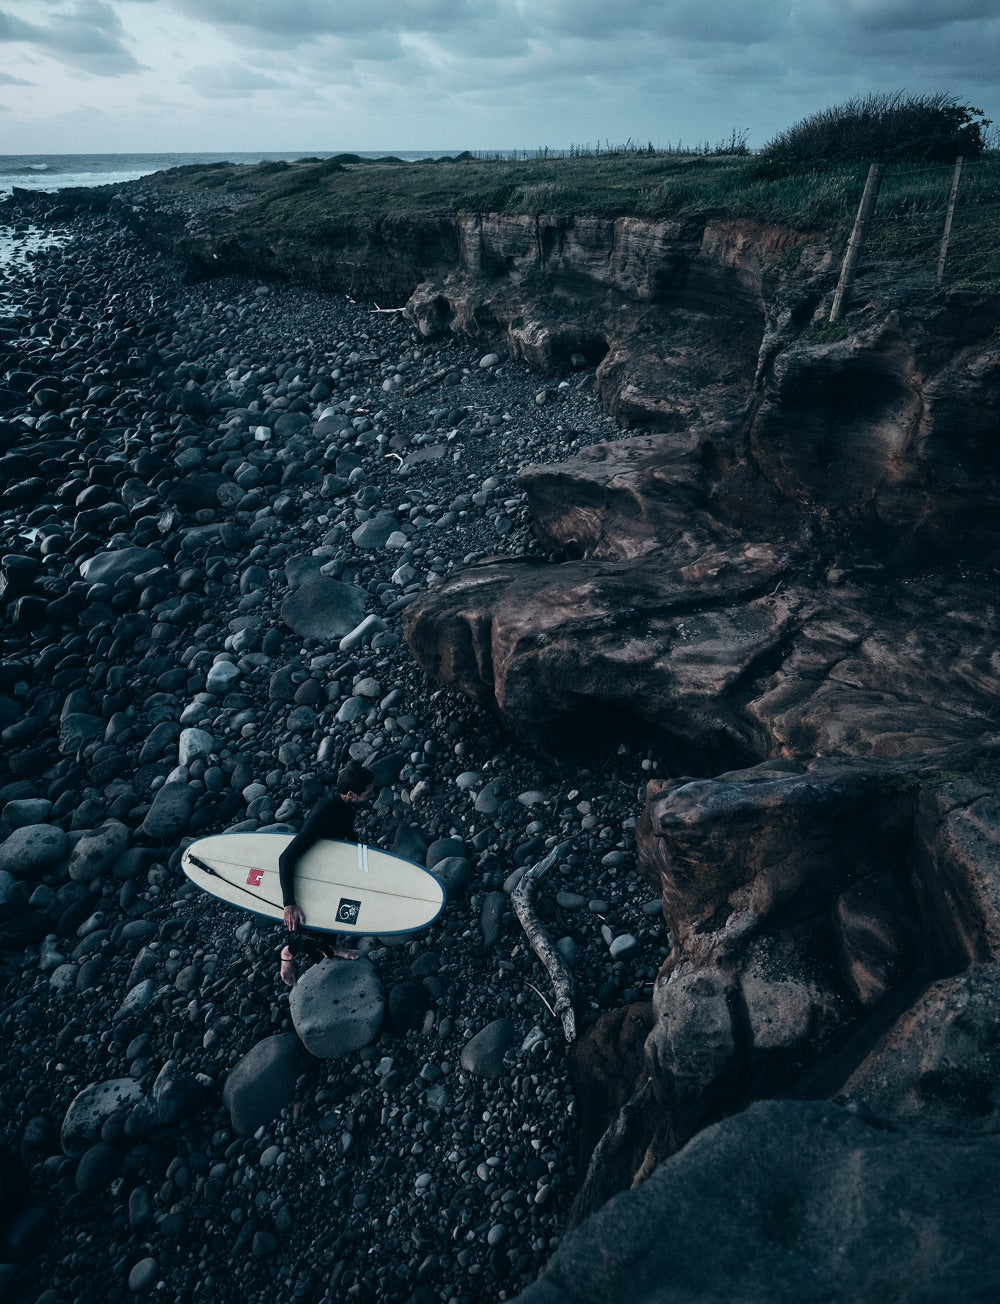 A surfer exits the water ready to scramble up the rocks to the field above